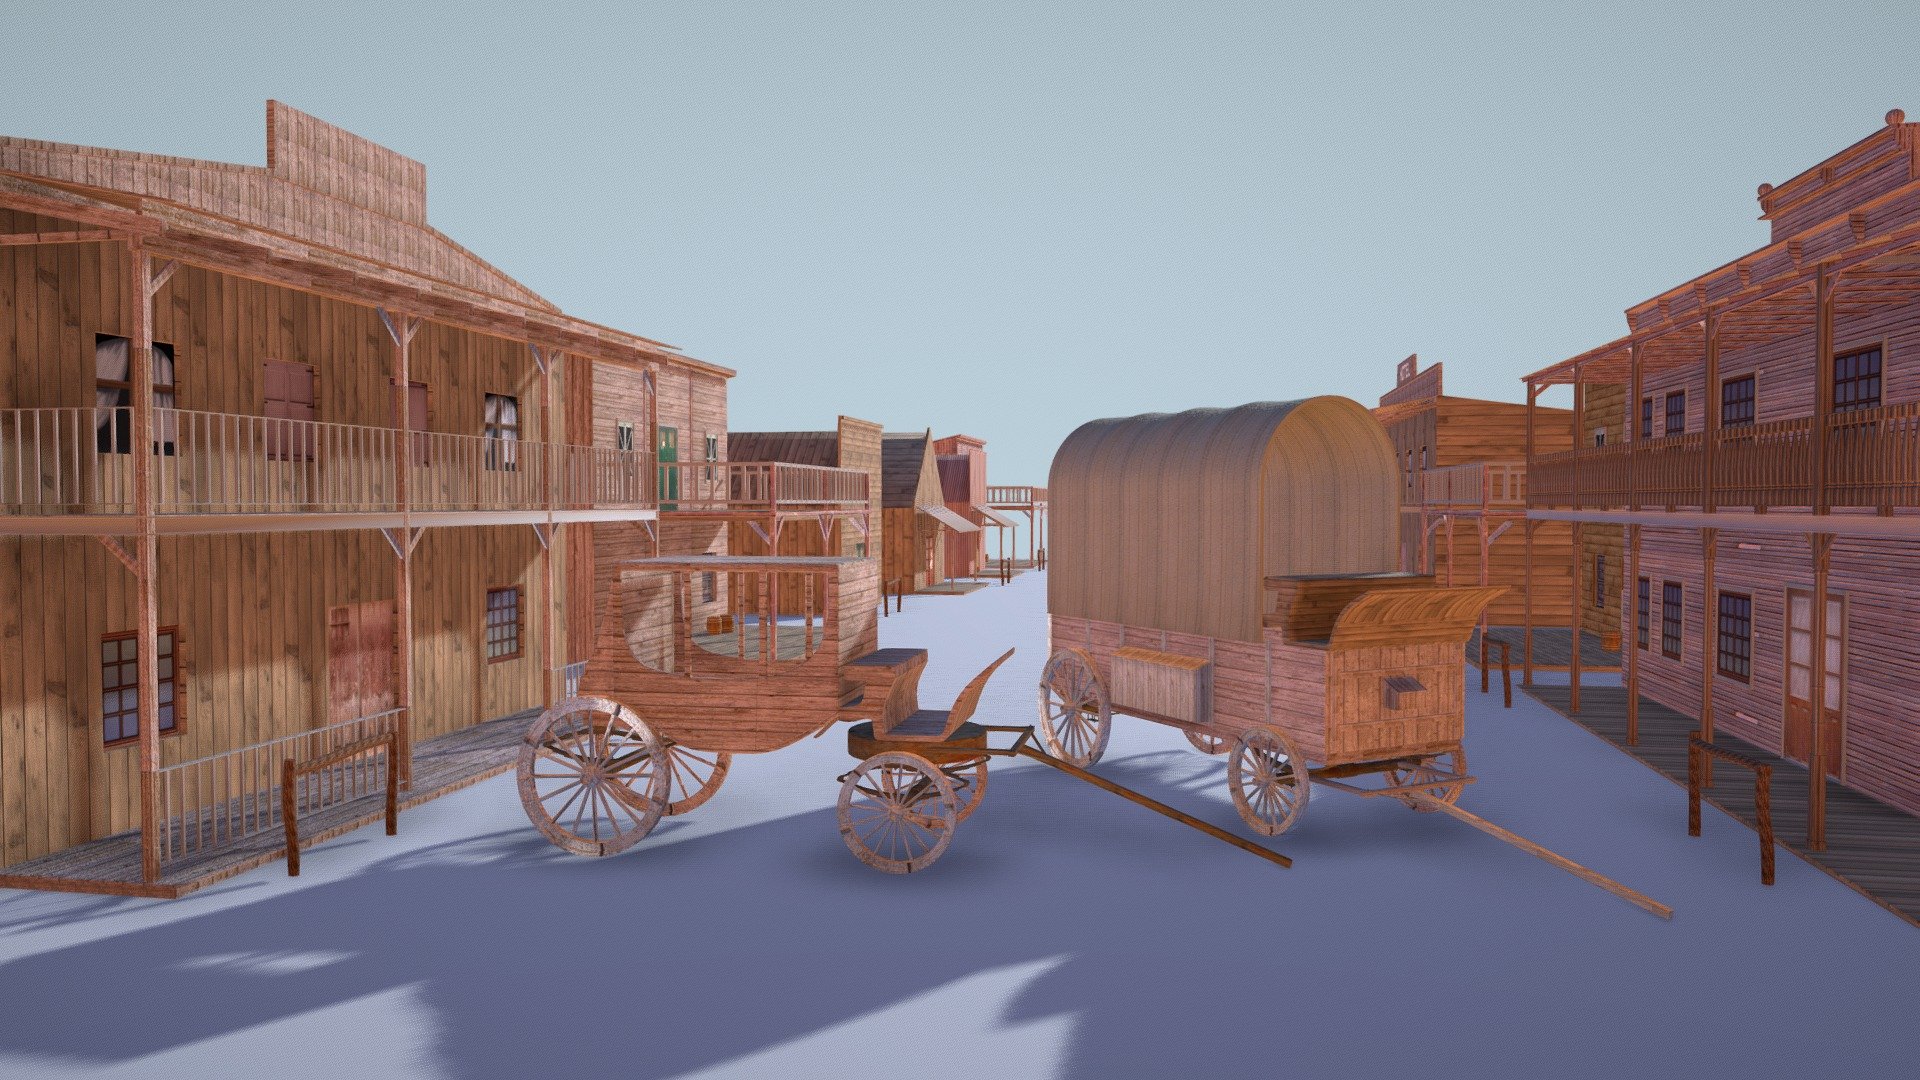 High detailed old western town, comes along with with 2 detailed carriages.

Included Formats:

3DS

Lightwave

3ds Max

Maya

OBJ

Softimage - Old Western Town - Buy Royalty Free 3D model by 3DHorse 3d model